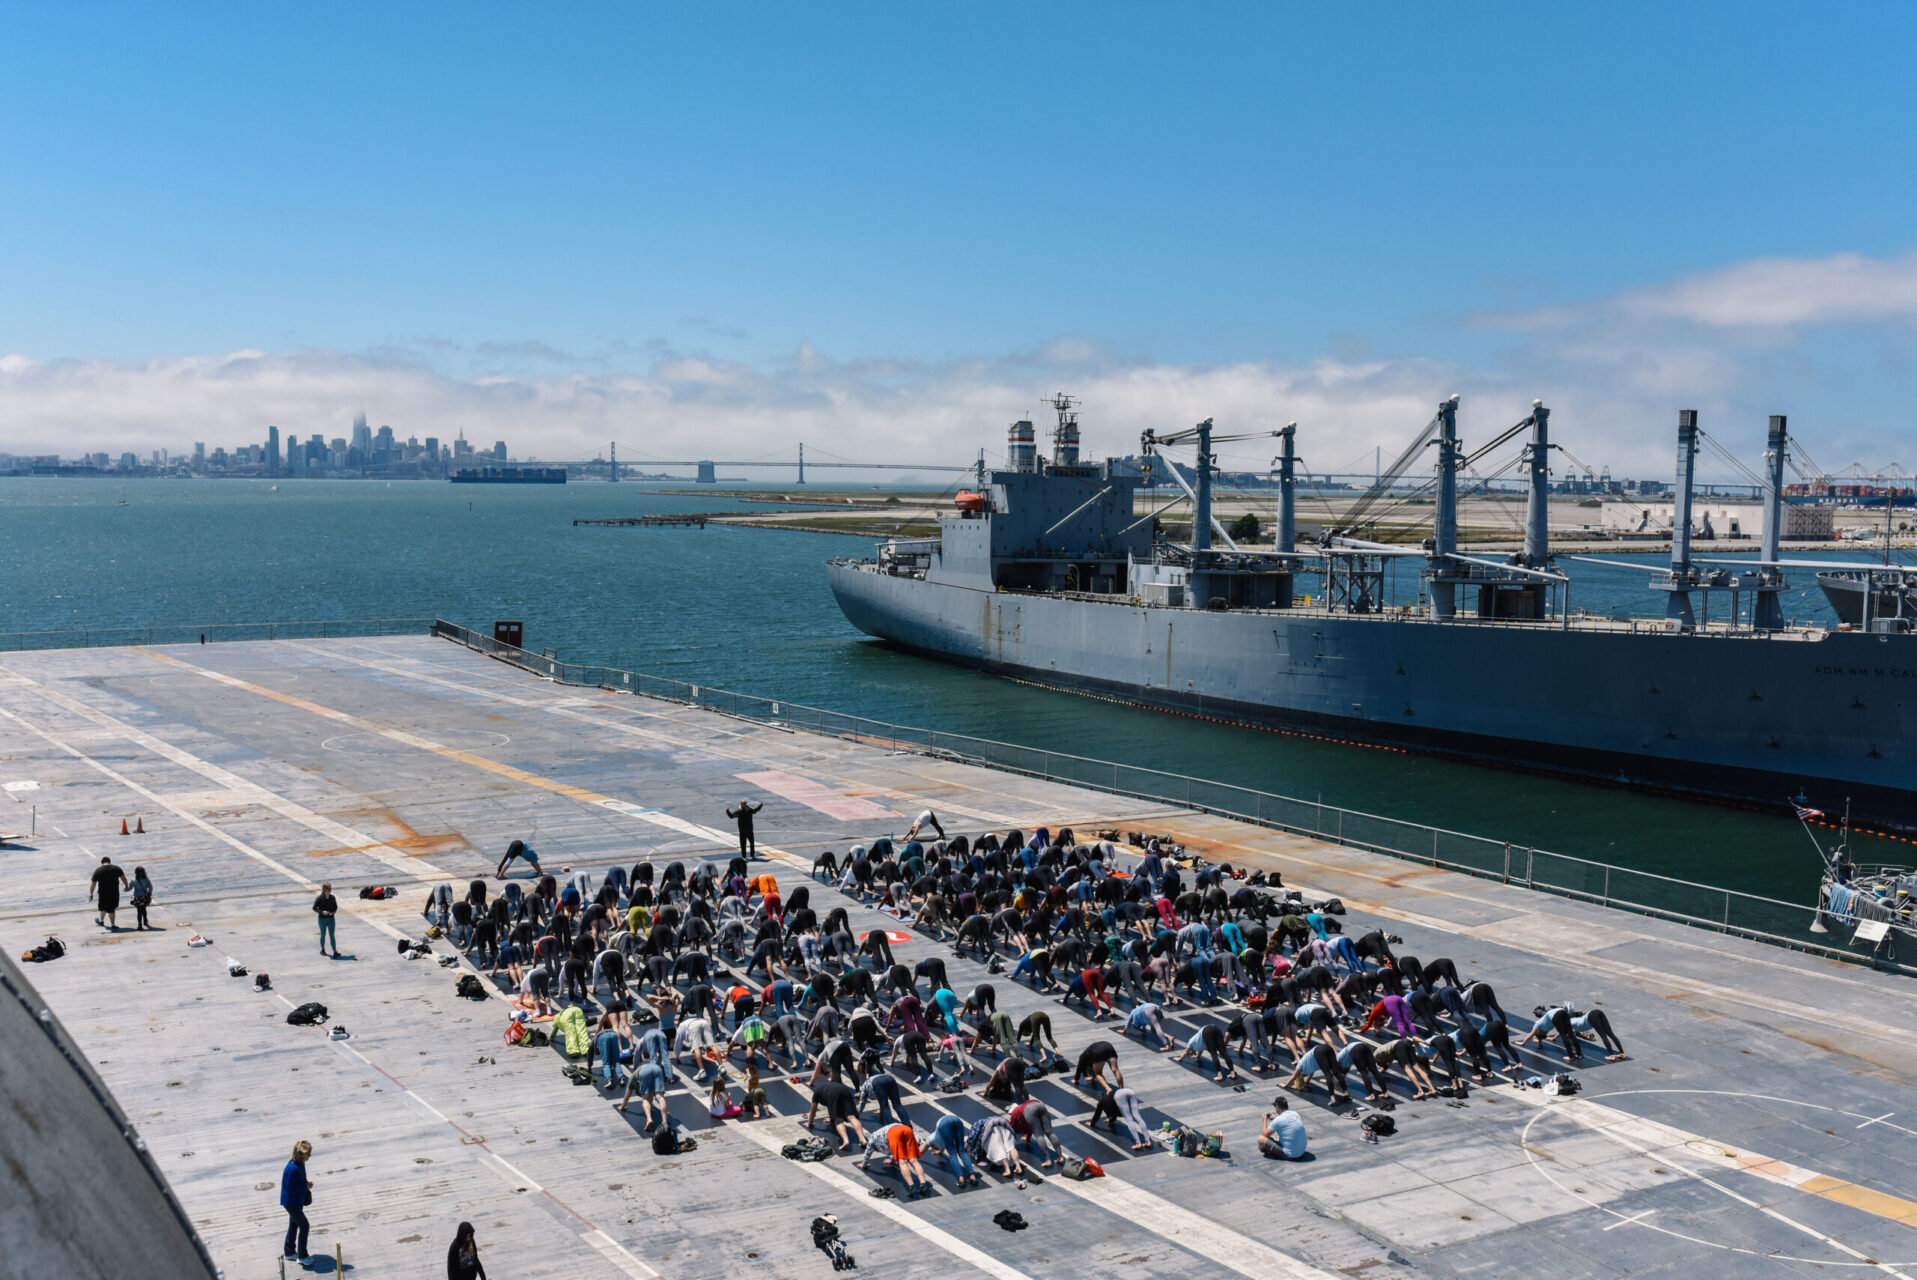 veterans yoga project - yoga on aircraft carrier